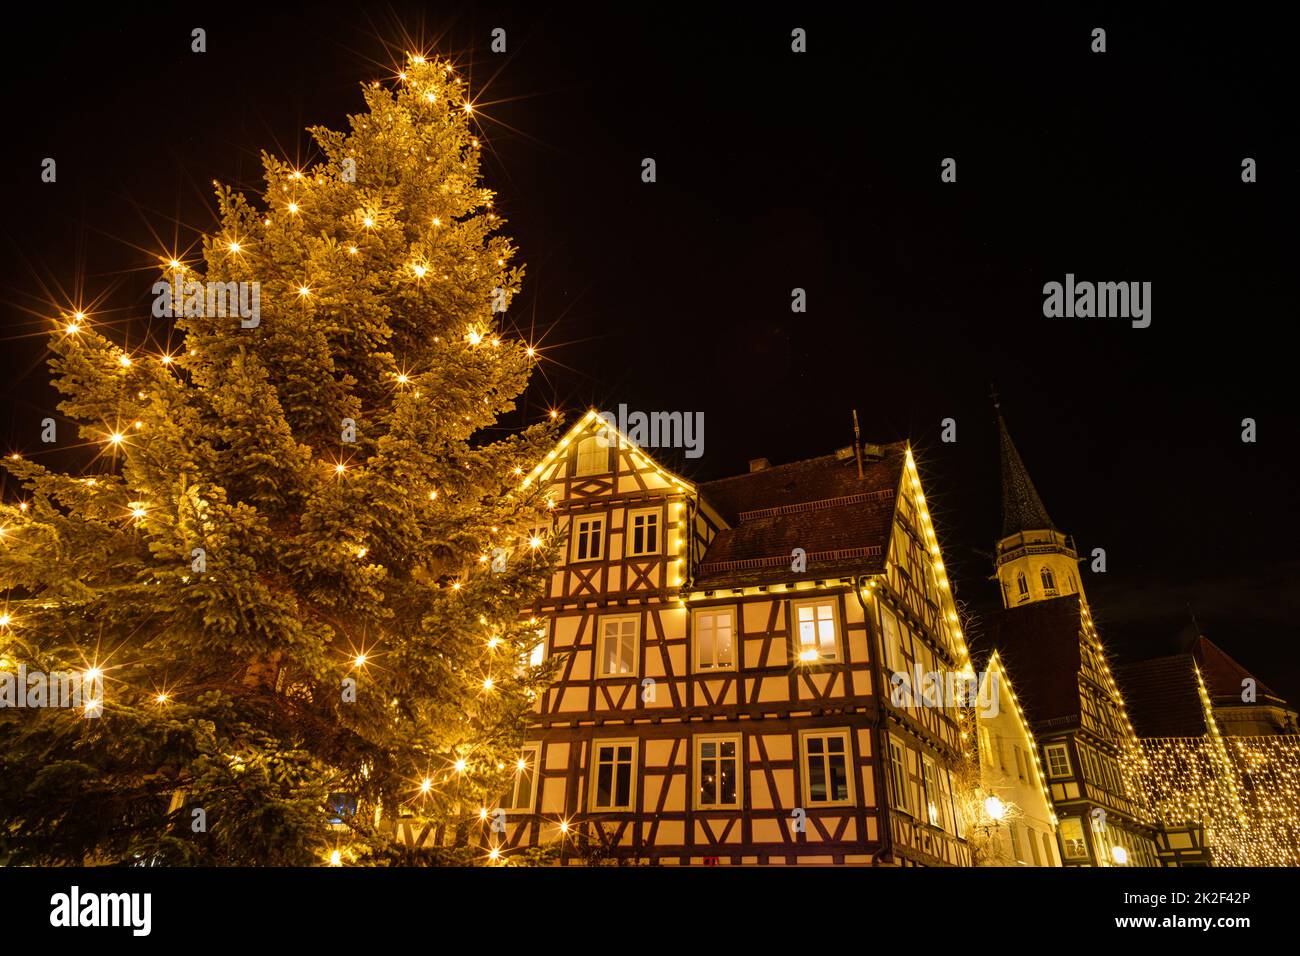 Christmas tree with half-timbered house and church in Germany Stock Photo